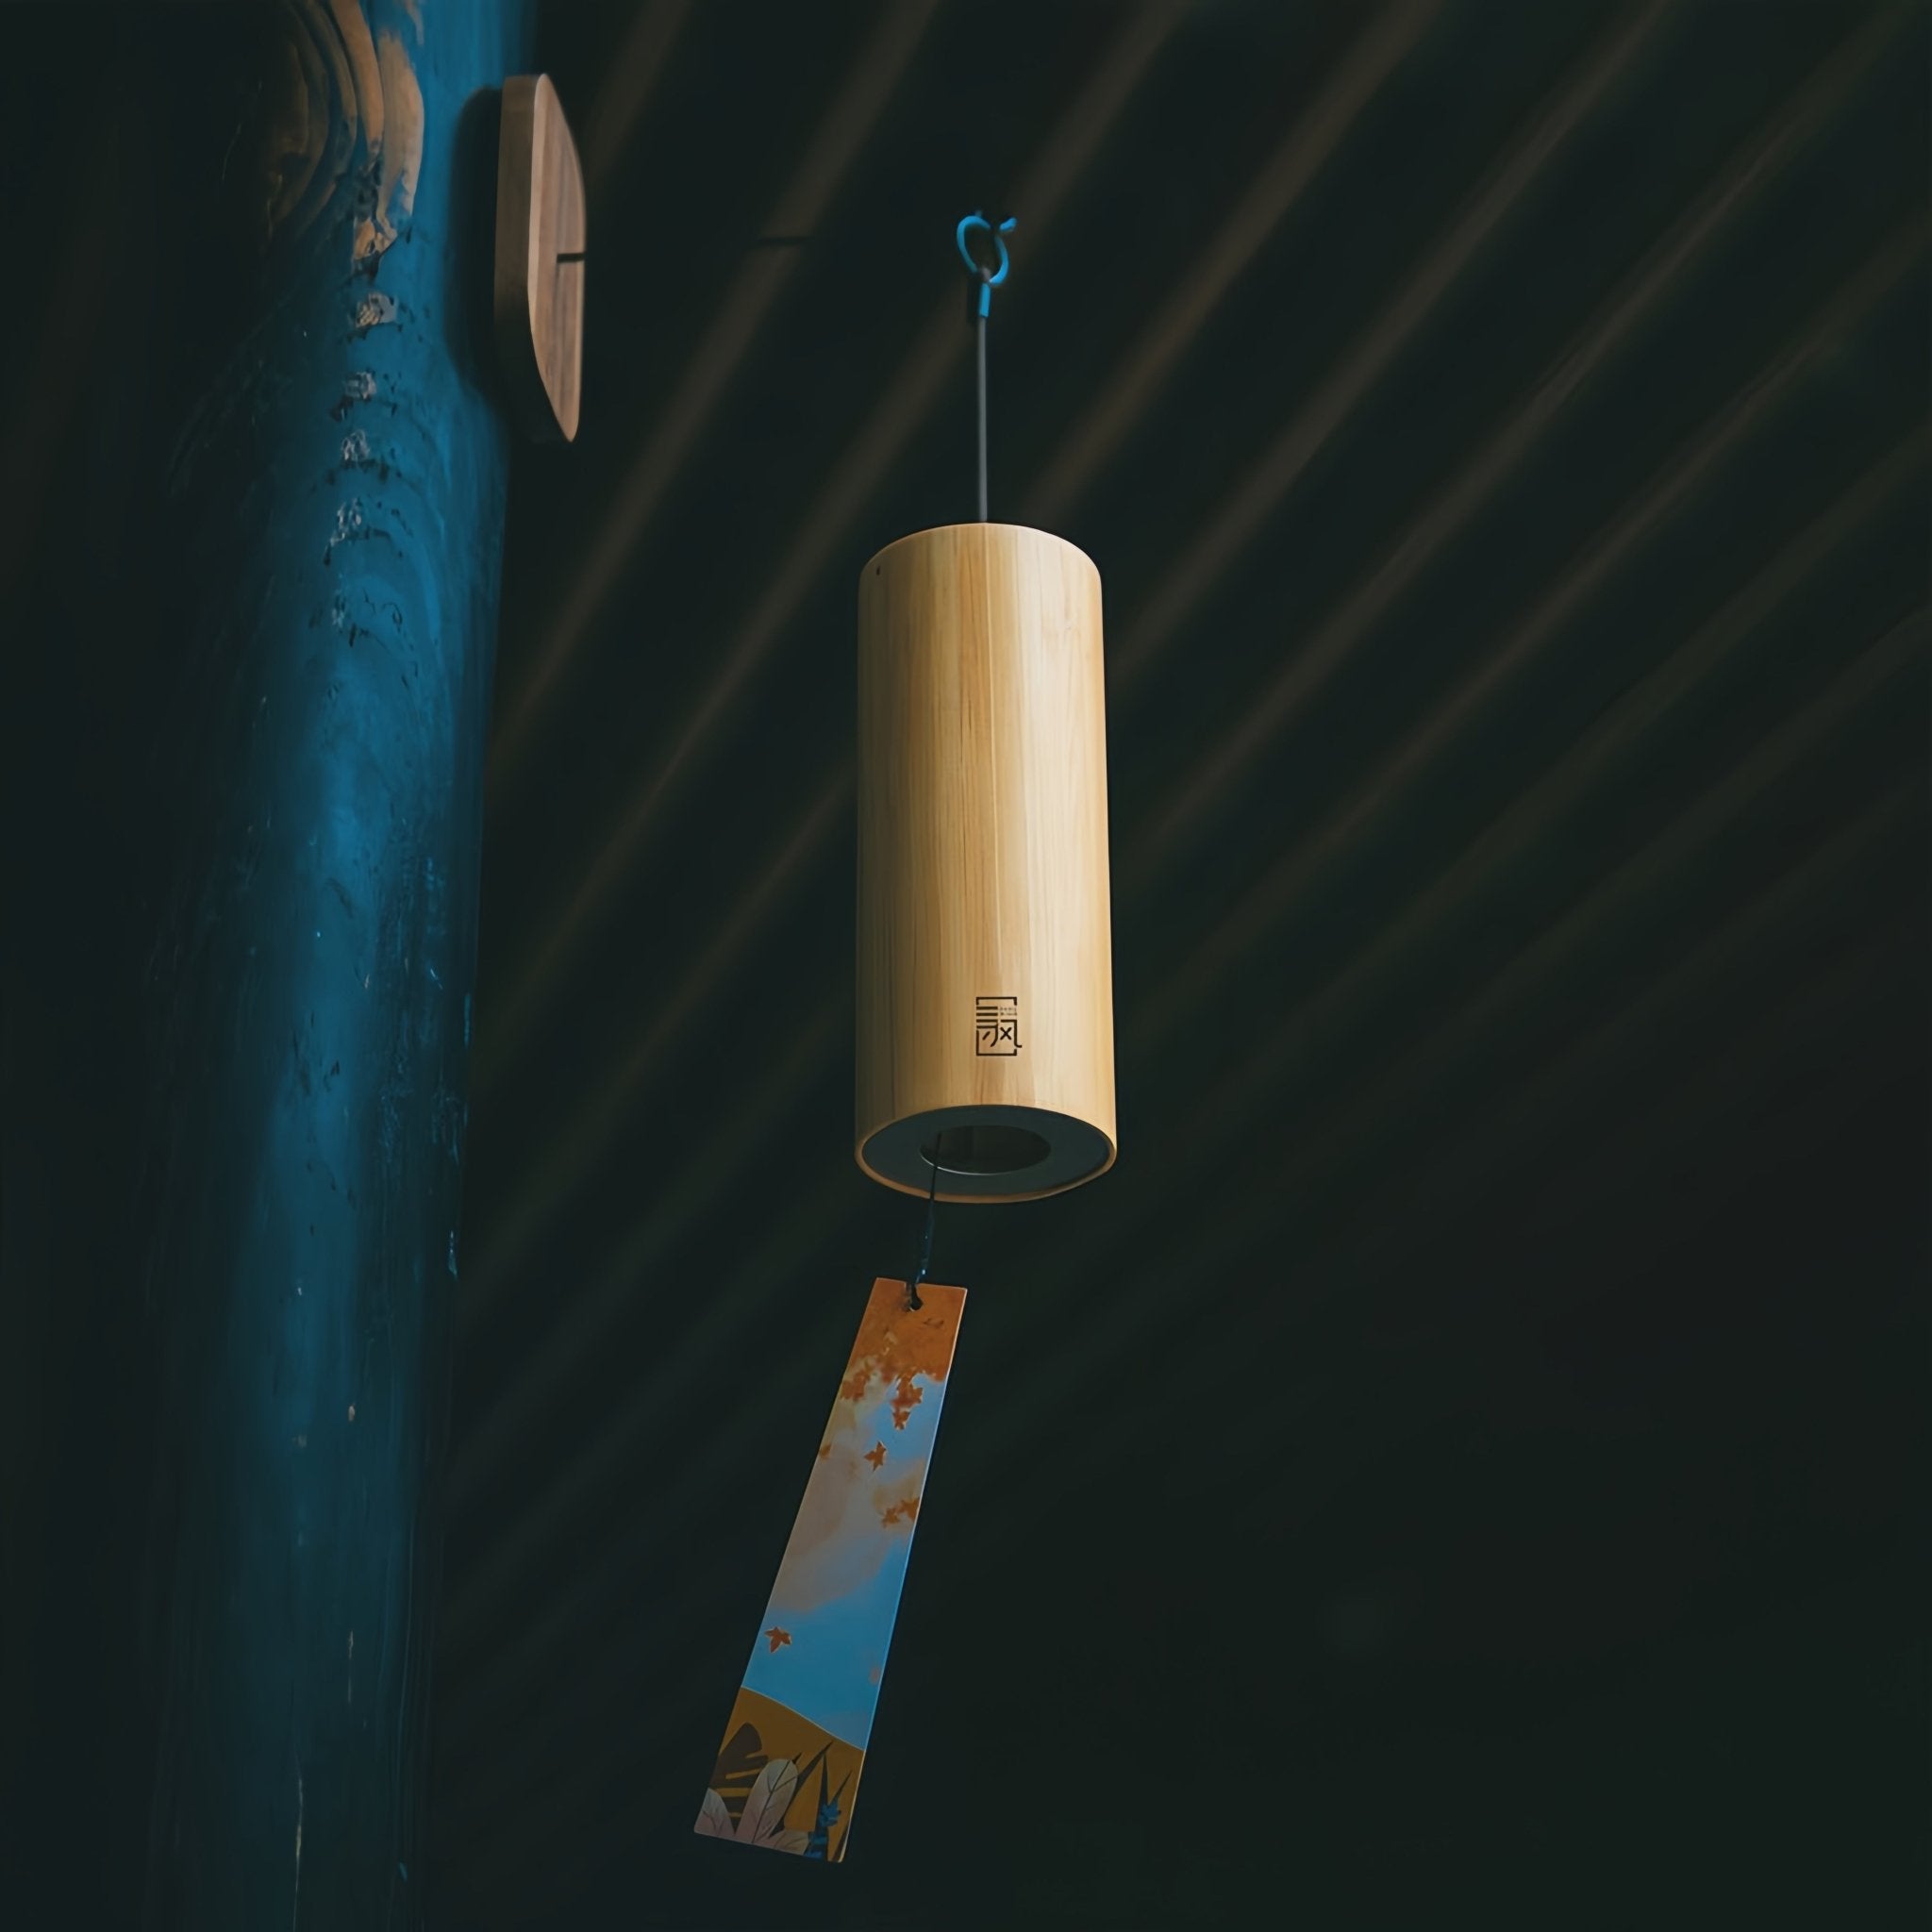 Bamboo harmonic wind chime hanging against a blue background.